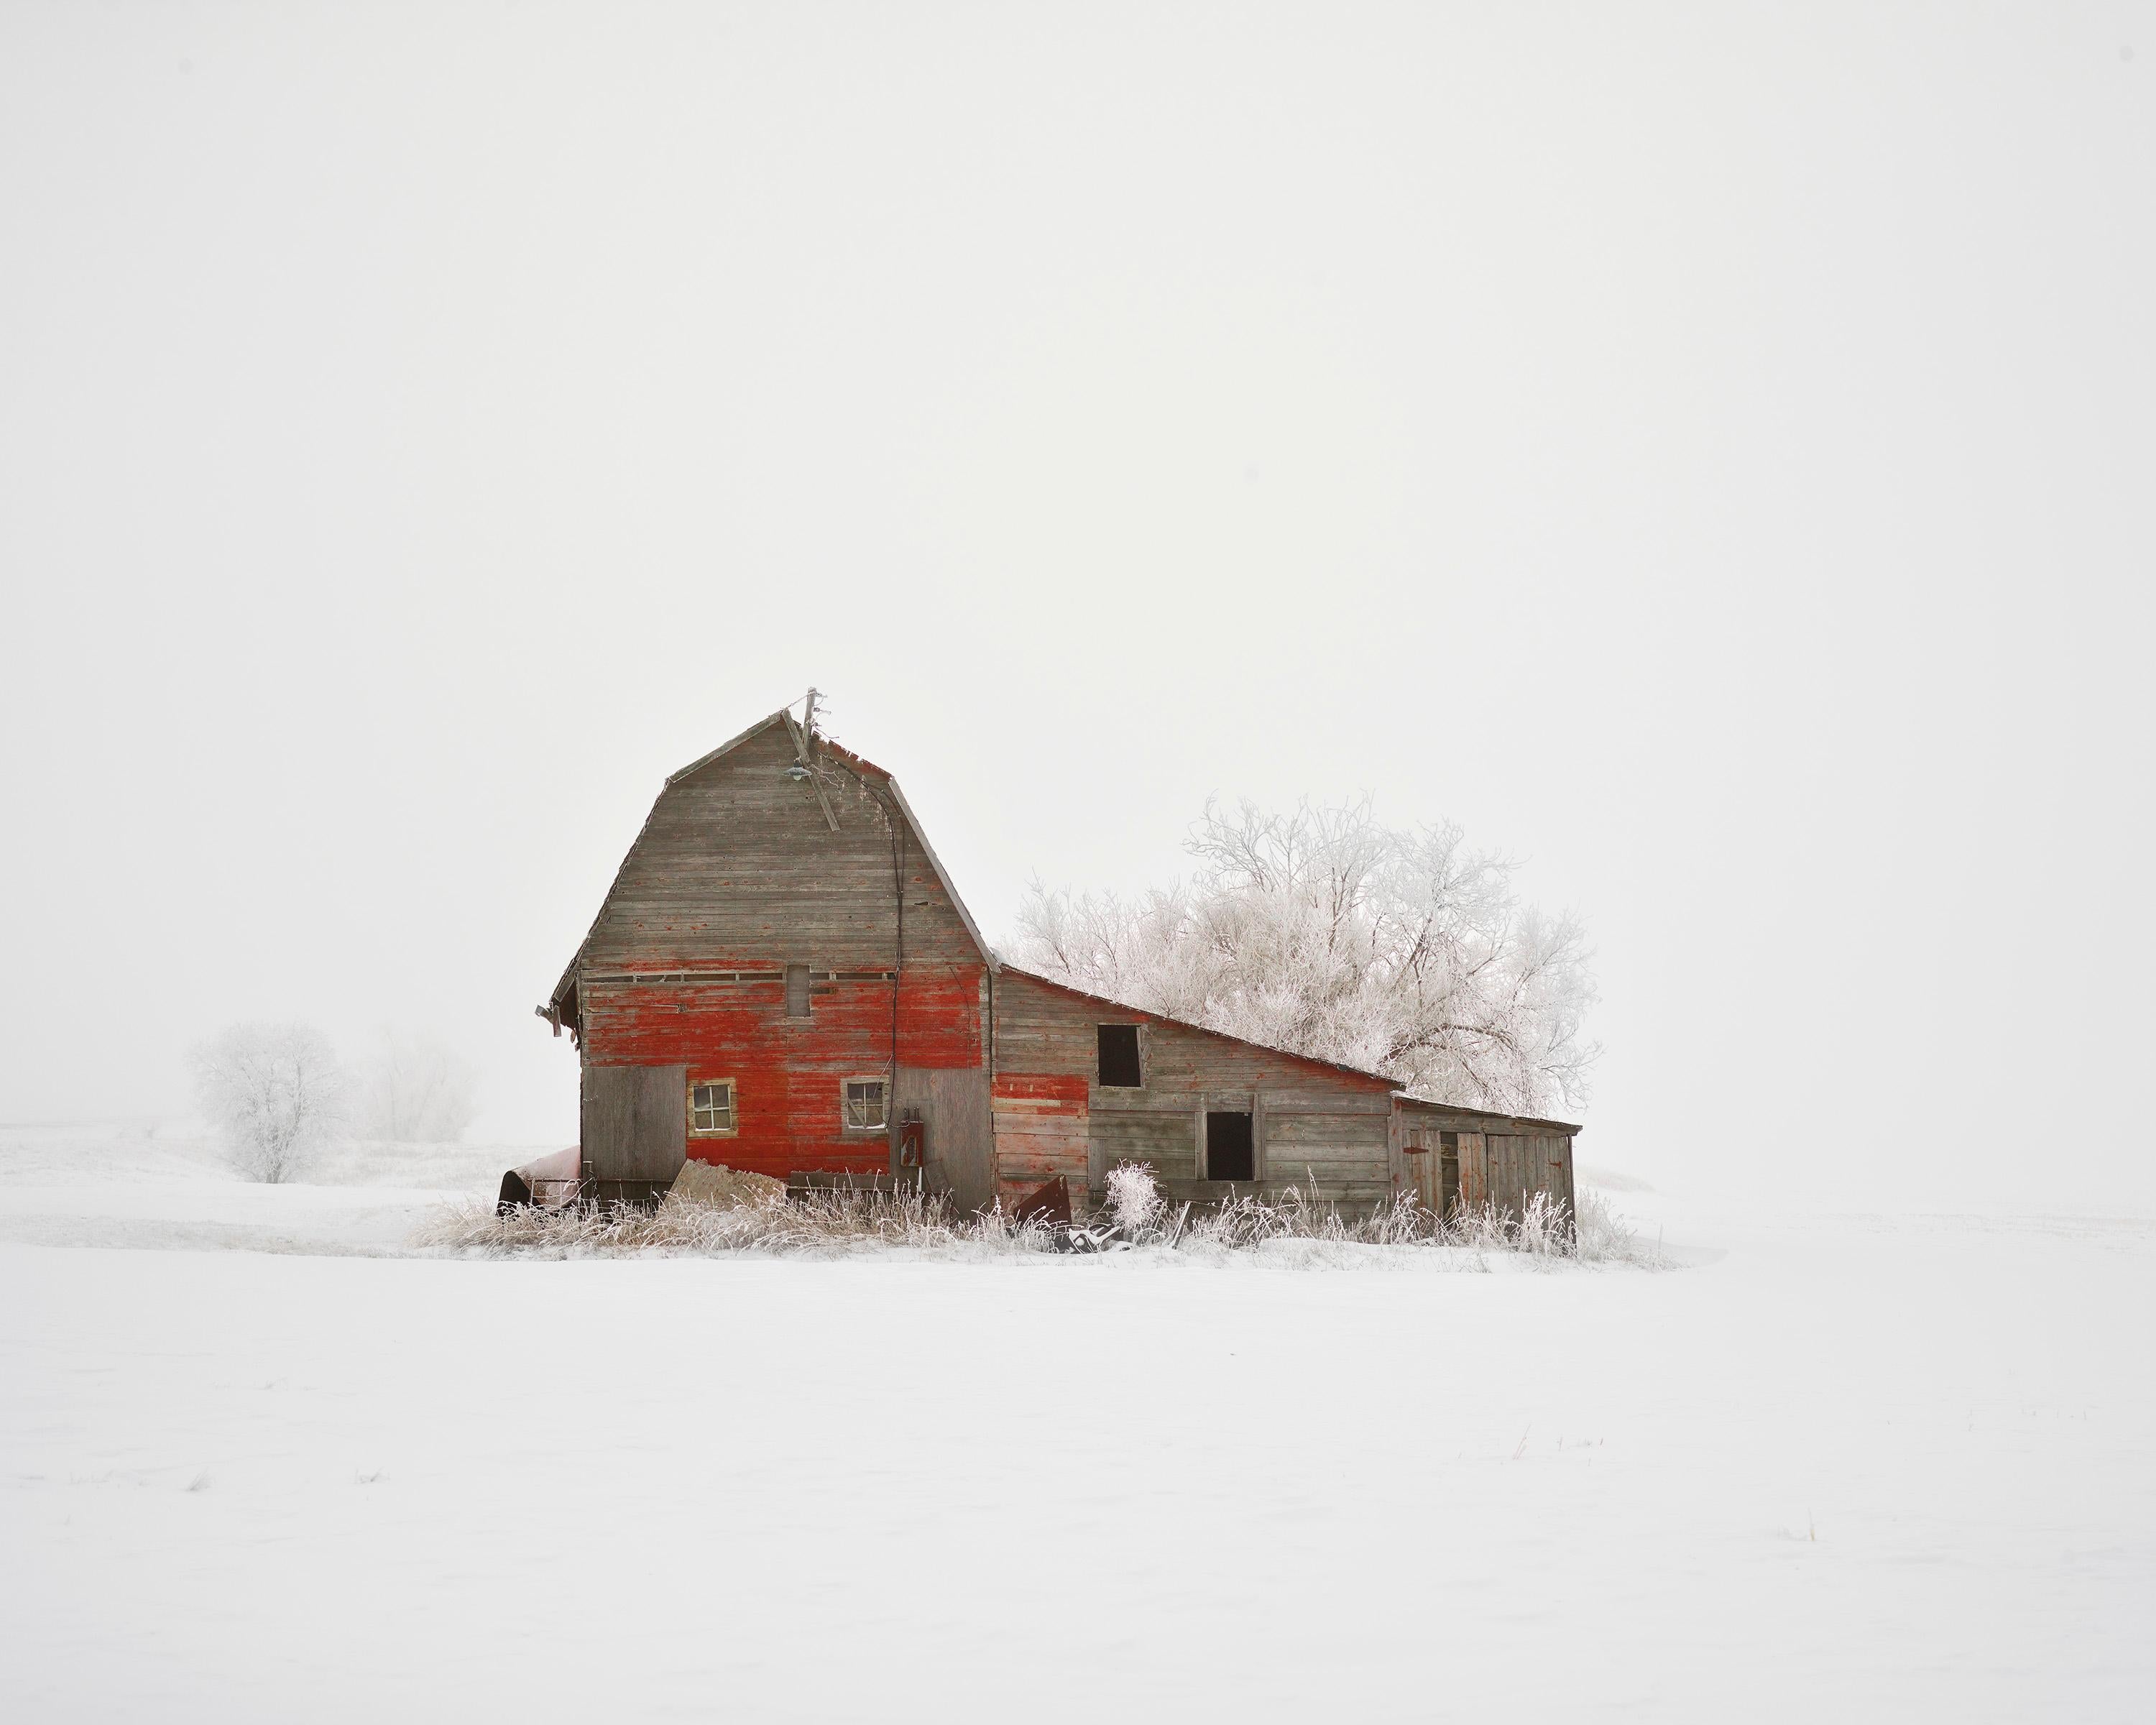 David Burdeny Landscape Photograph - Barn with Hoarfrost- Landscape photograph framed in white